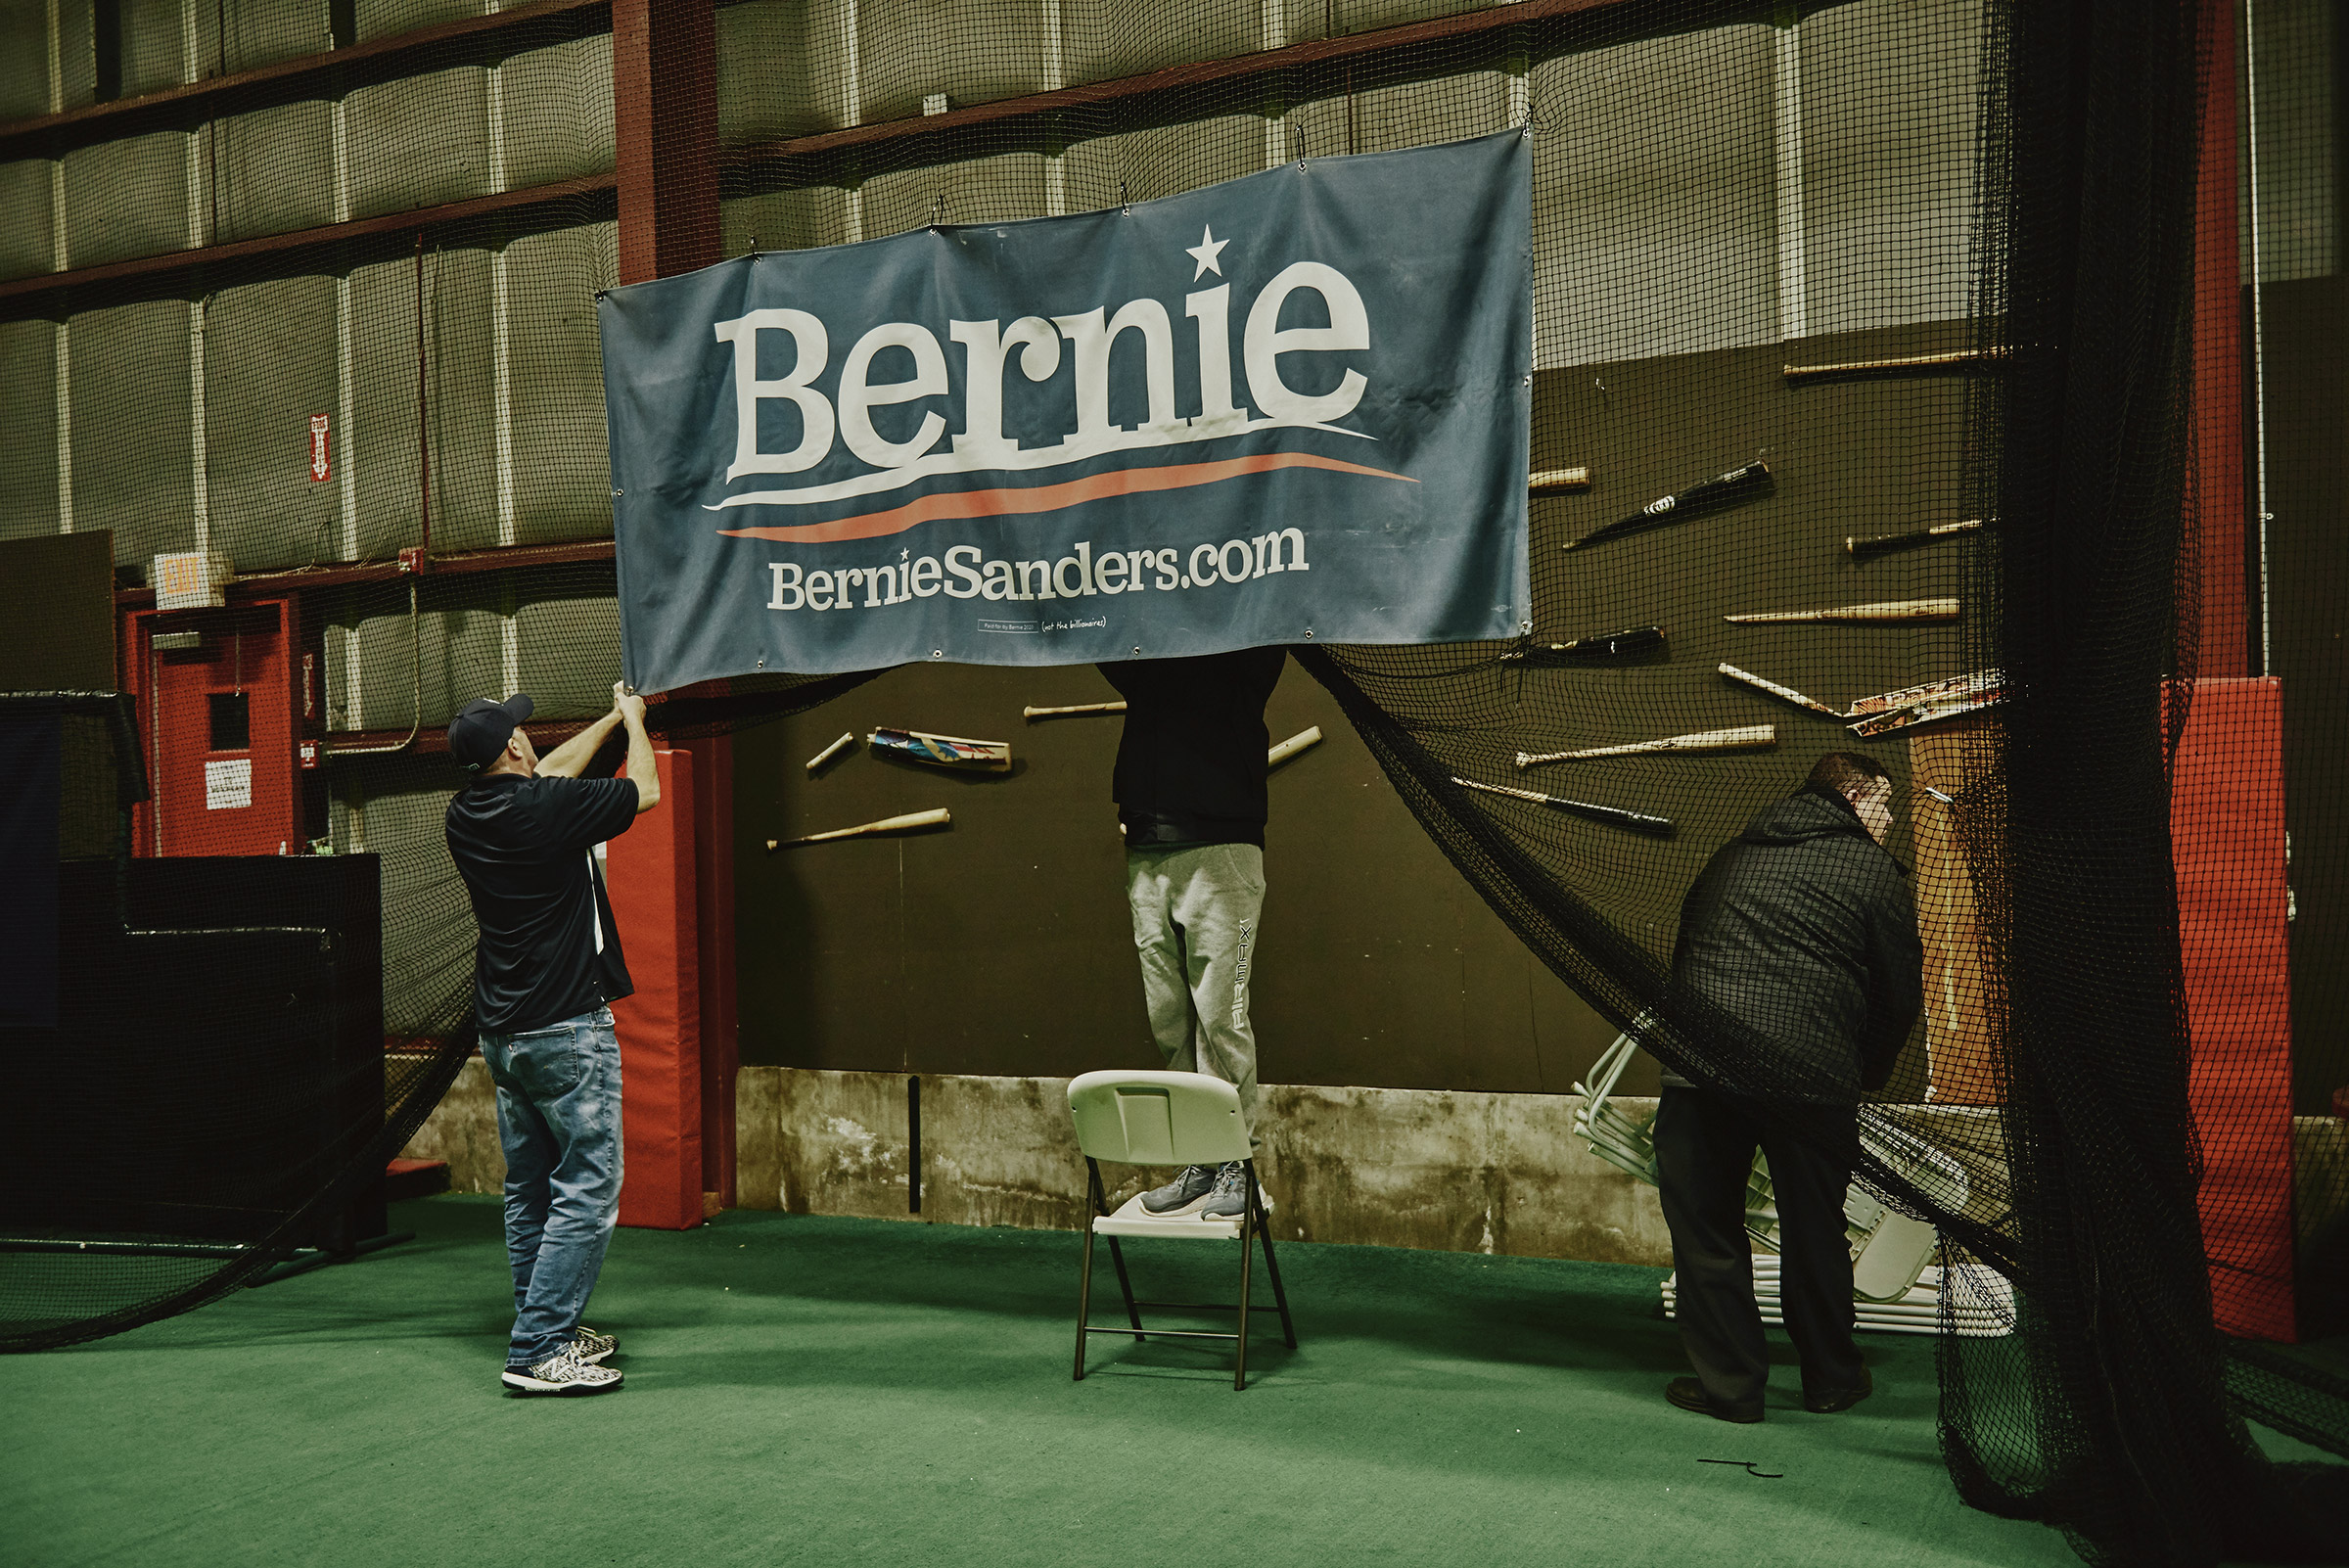 Workers clean up after the Bernie Sanders 2020 Debate Watch Party at the Ultimate Sports Academy in Manchester, N.H. on Feb. 7, 2020. (Tony Luong for TIME)